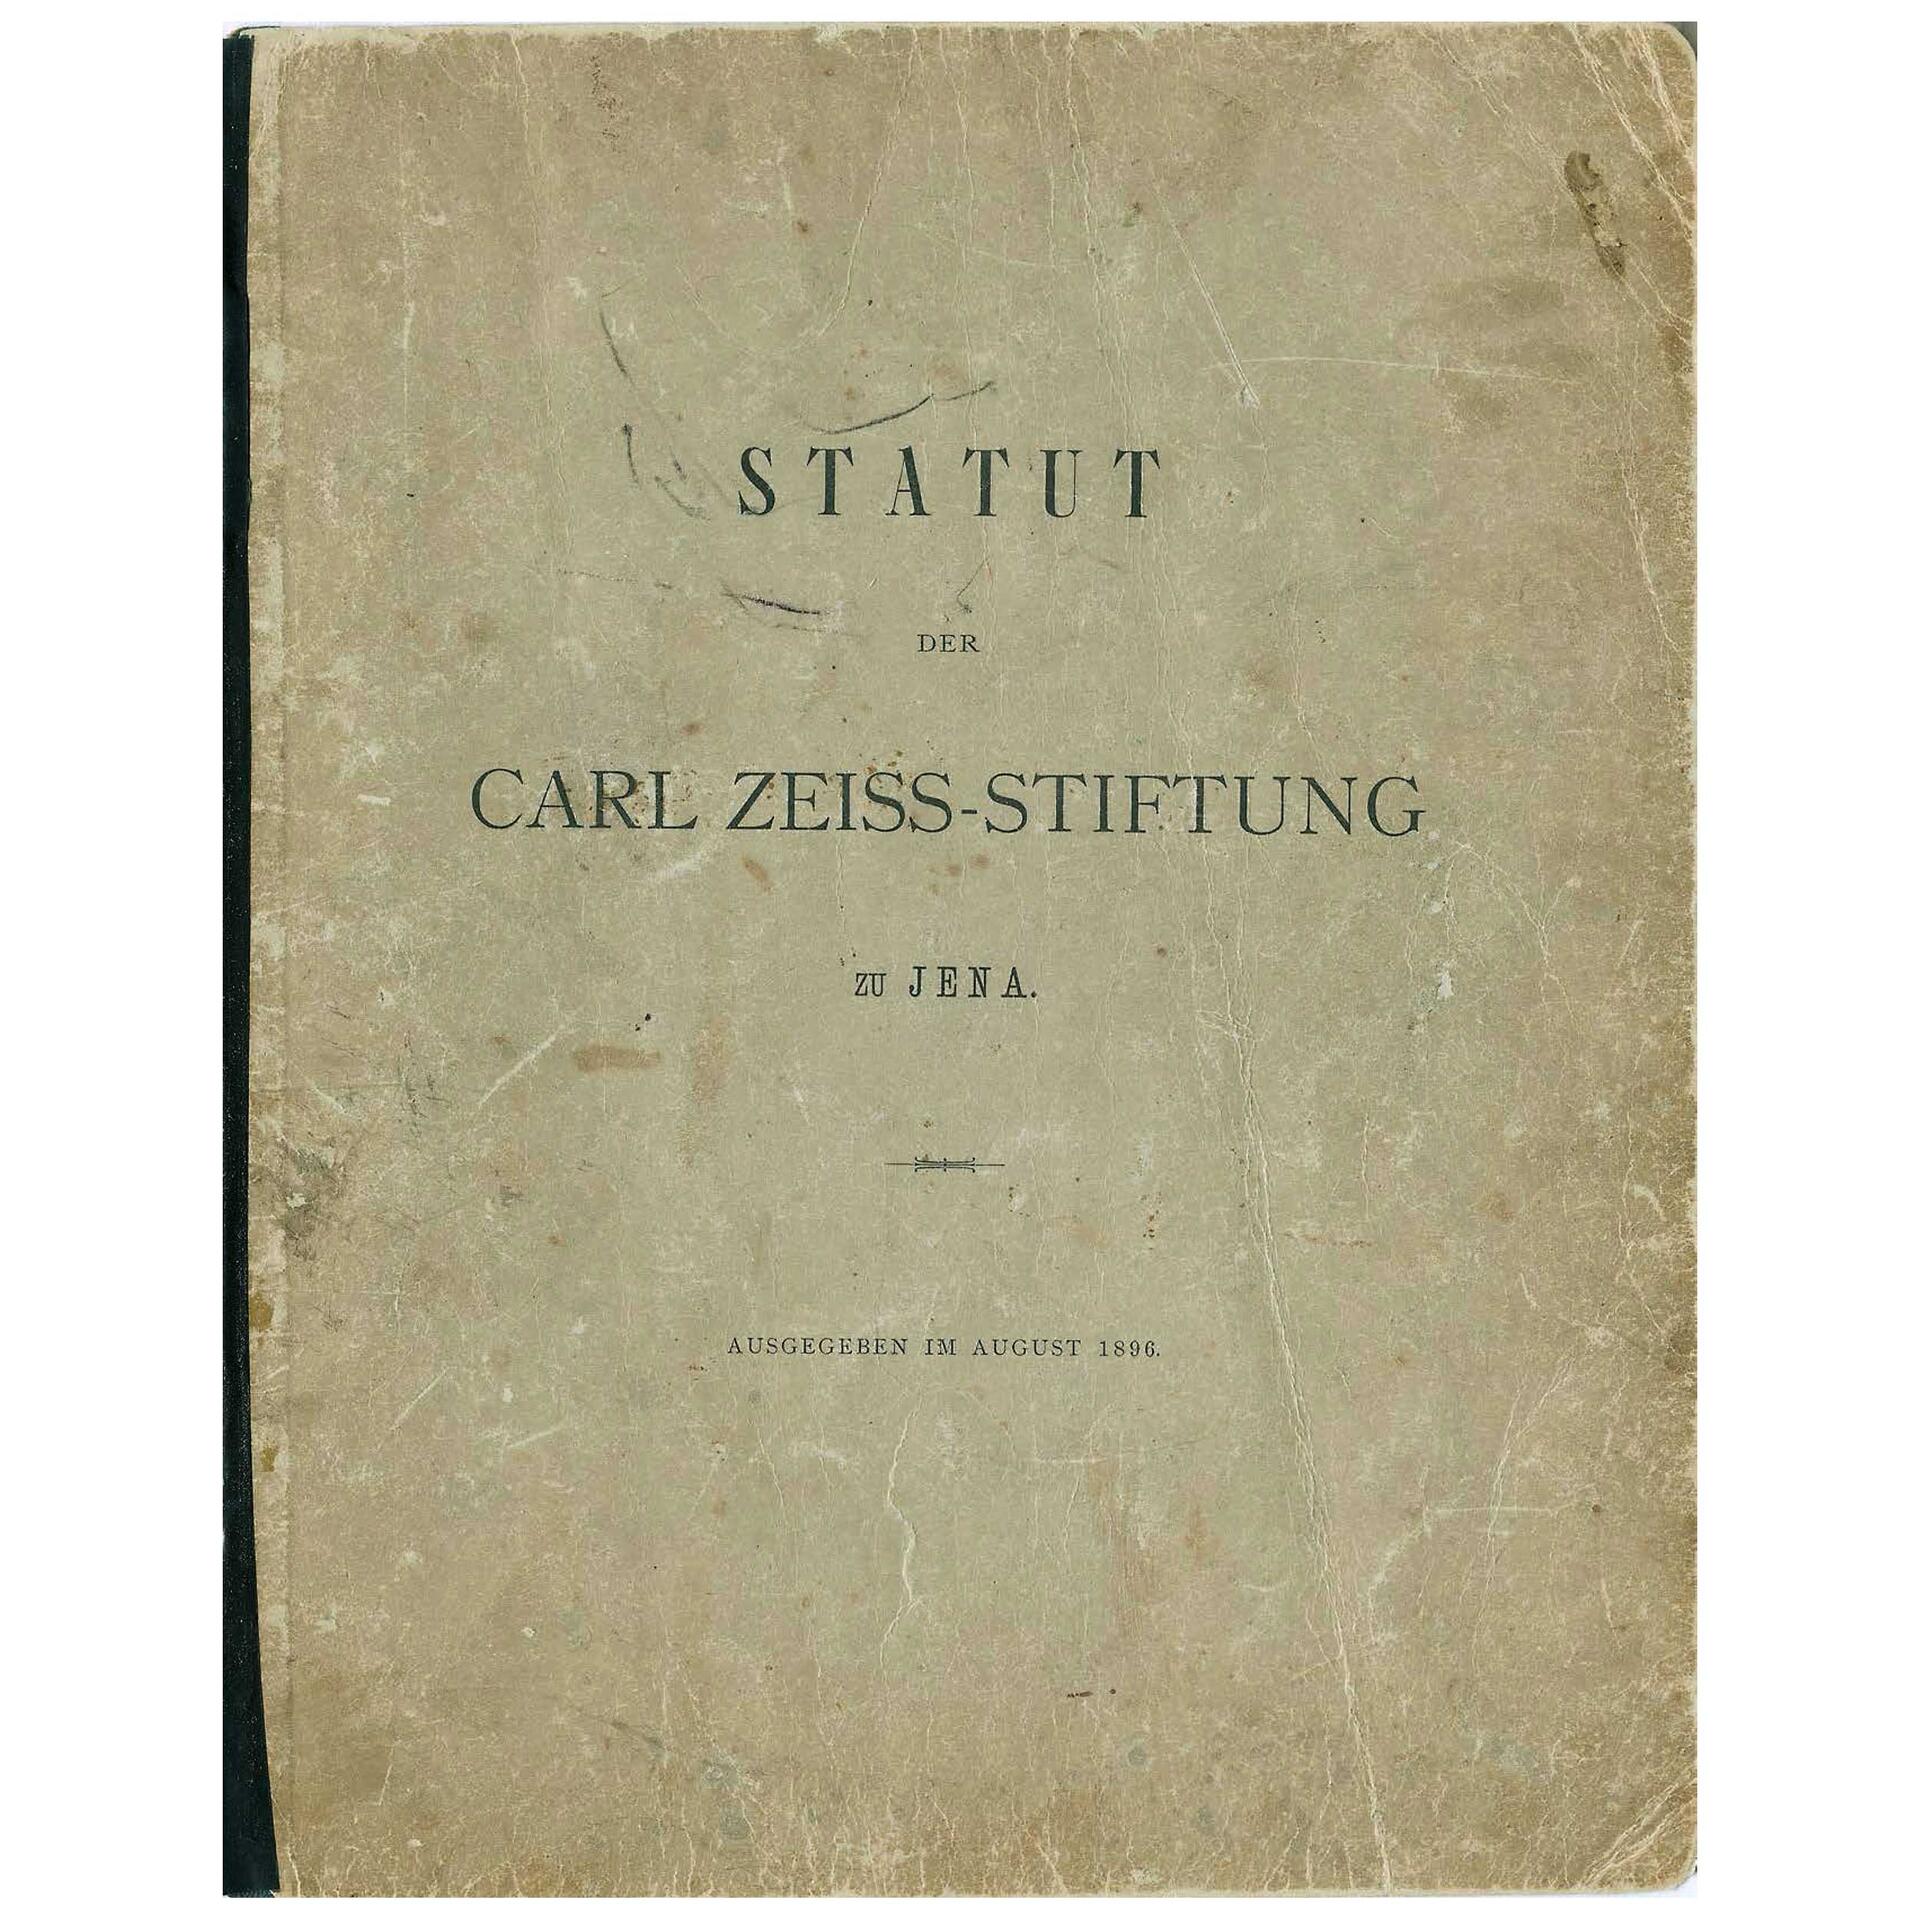 Statutes of the Carl Zeiss Foundation